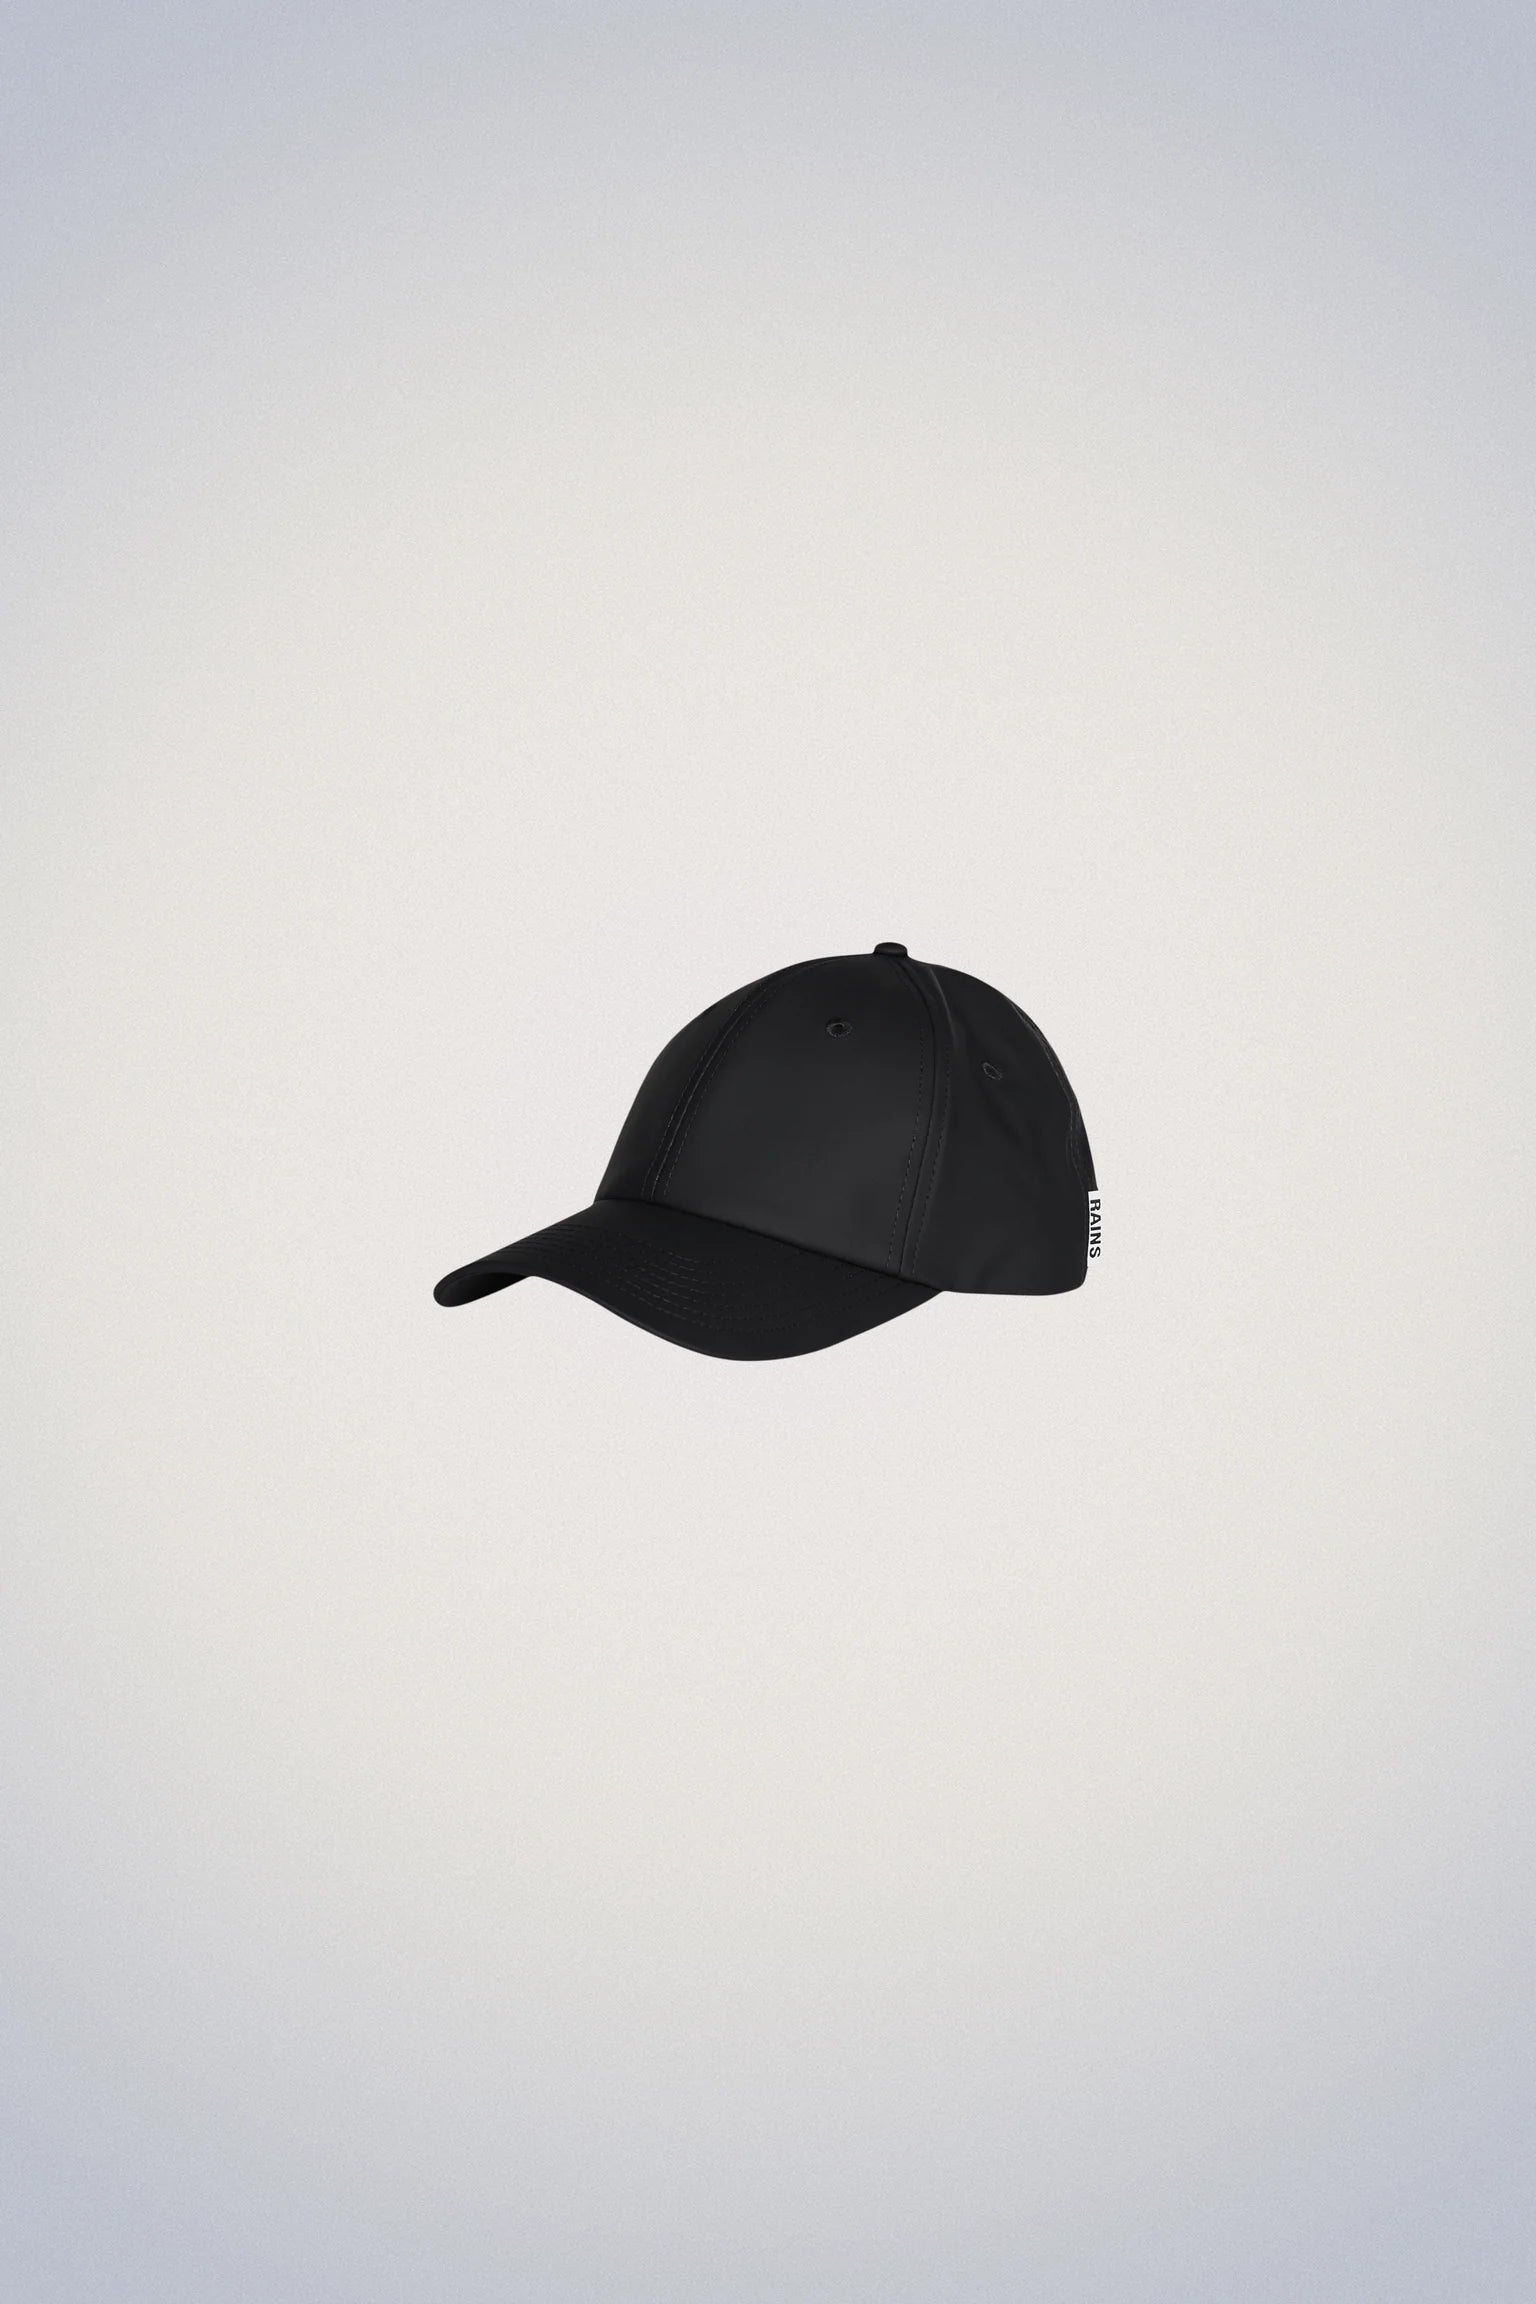 A black Waterproof Cap with a curved brim on a white background, made by Rains brand.